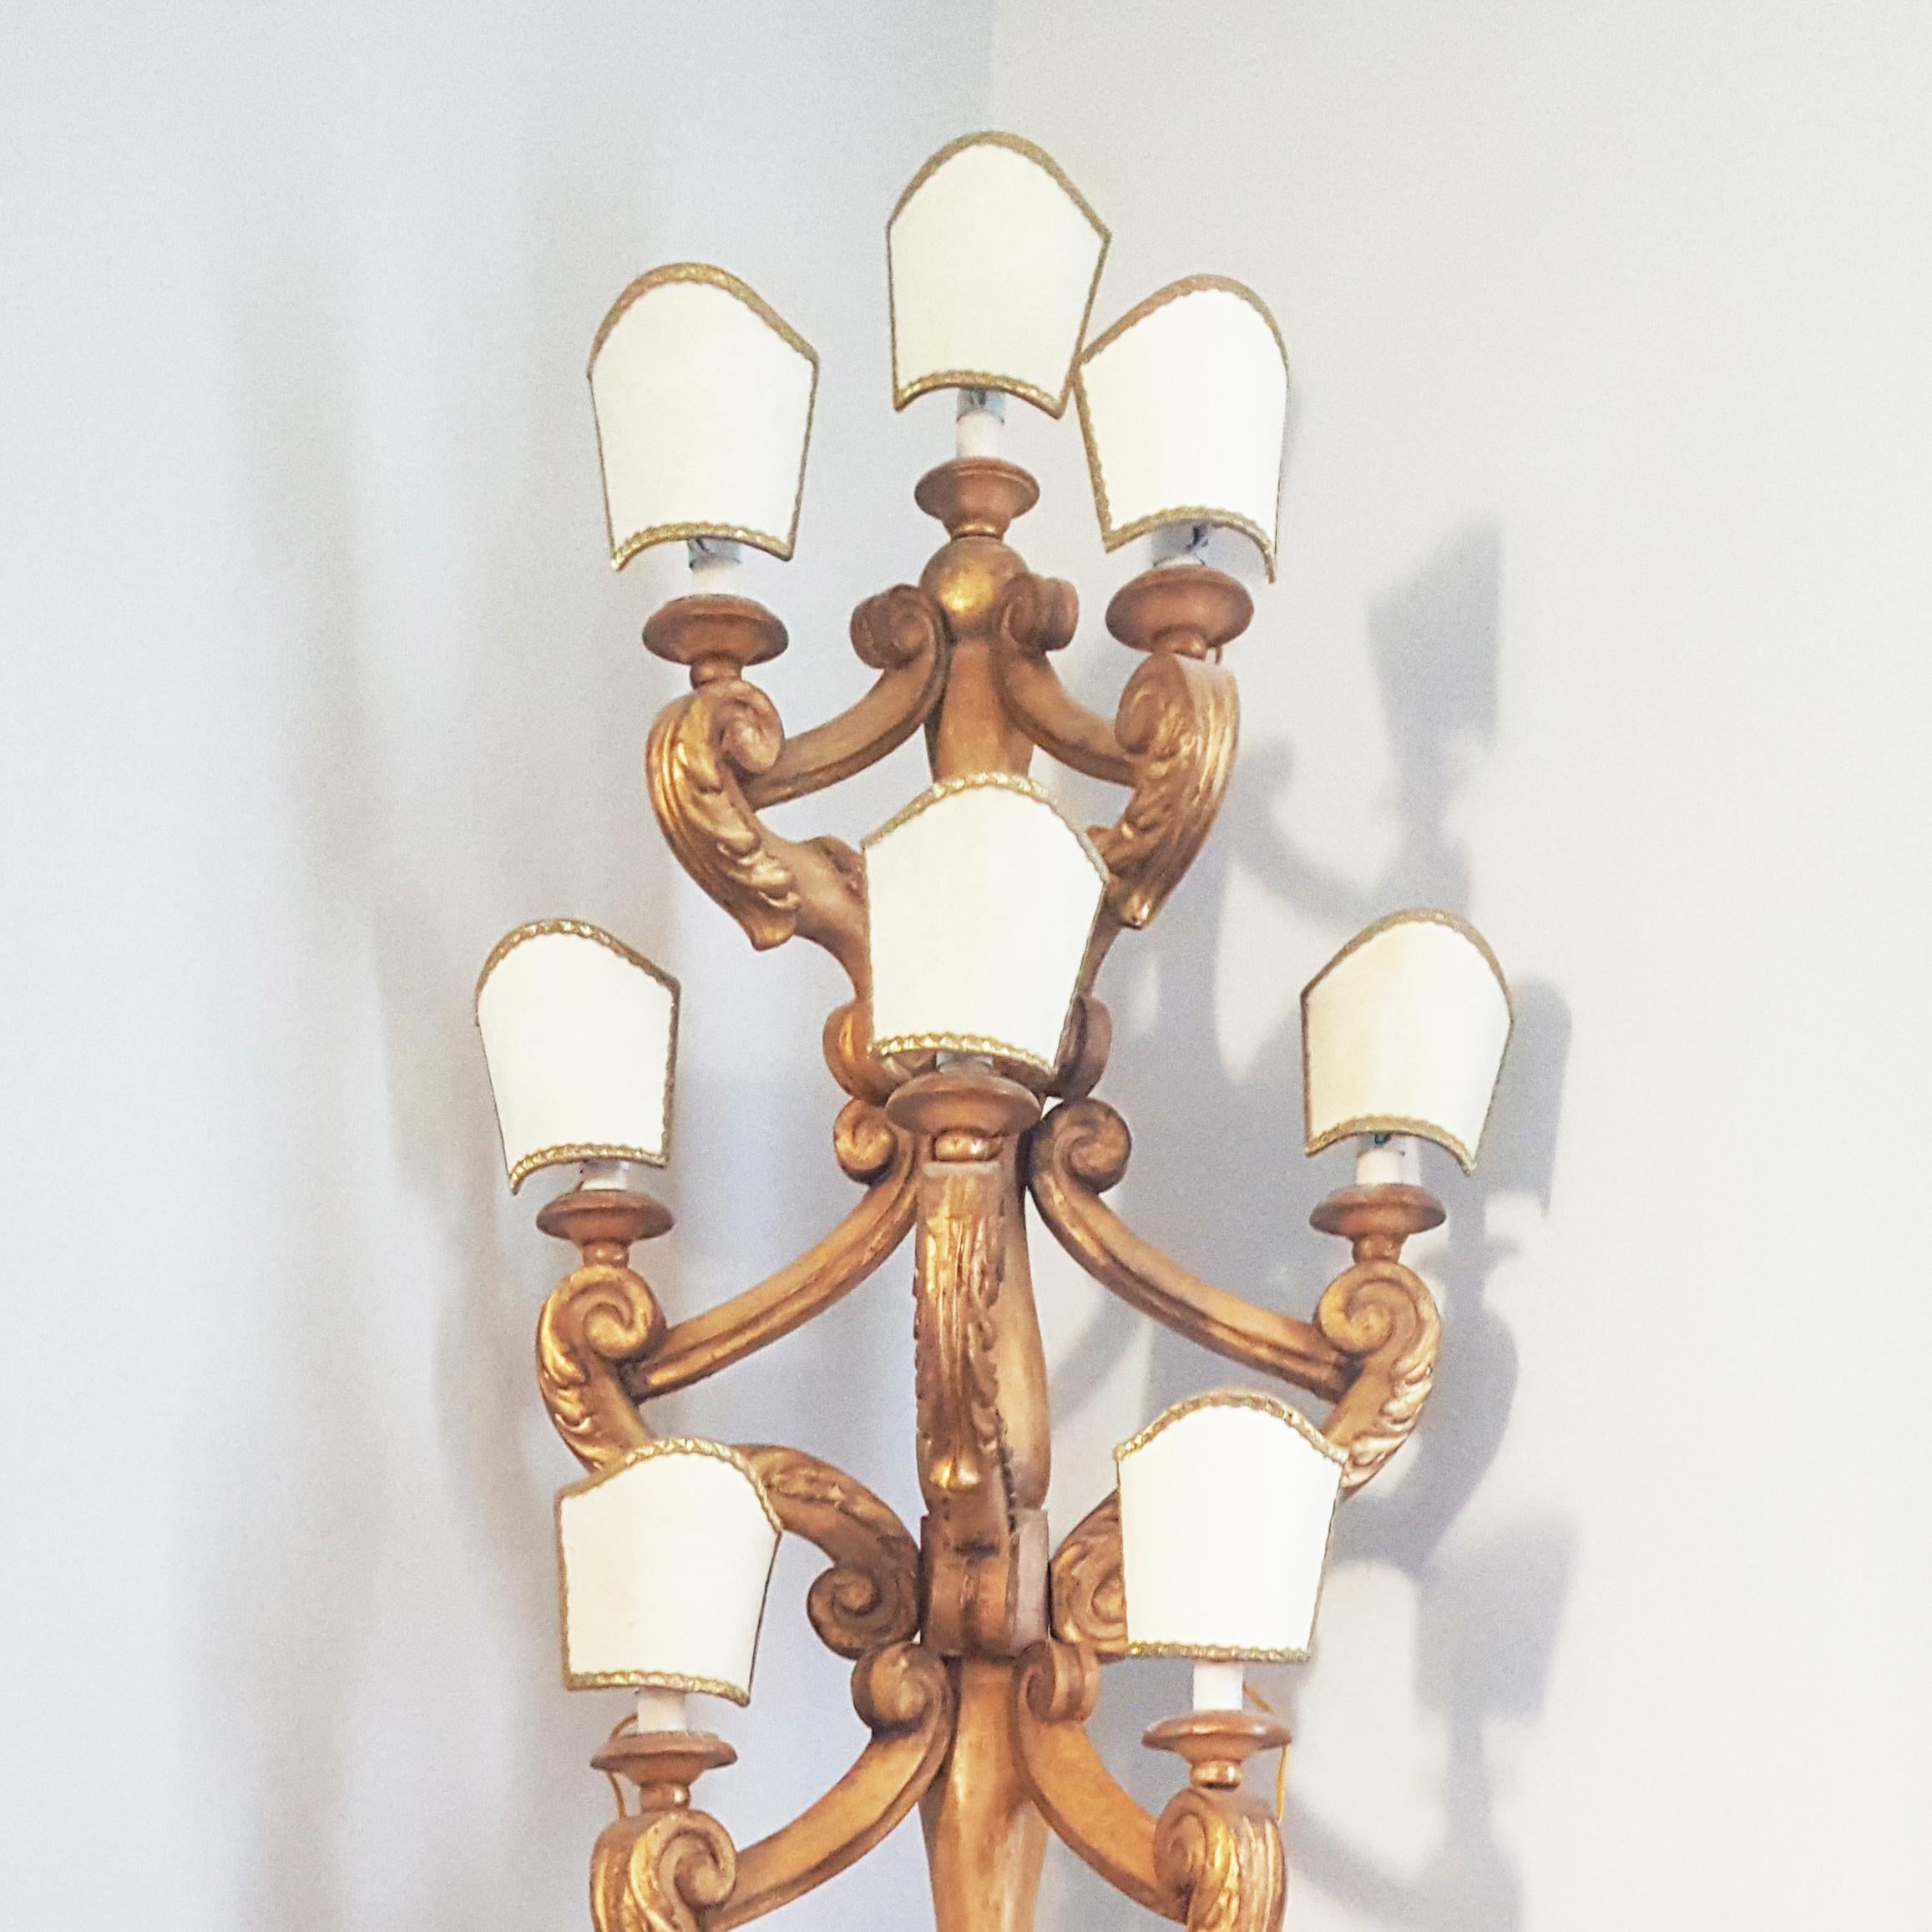 A charming pair of Tuscan candelabras in painted and gilt poplar wood.
Each candelabra is electrified and presents eleven lights covered by elegant parchment paper lampshades.
Tuscan manufactory from the 19th century.
  